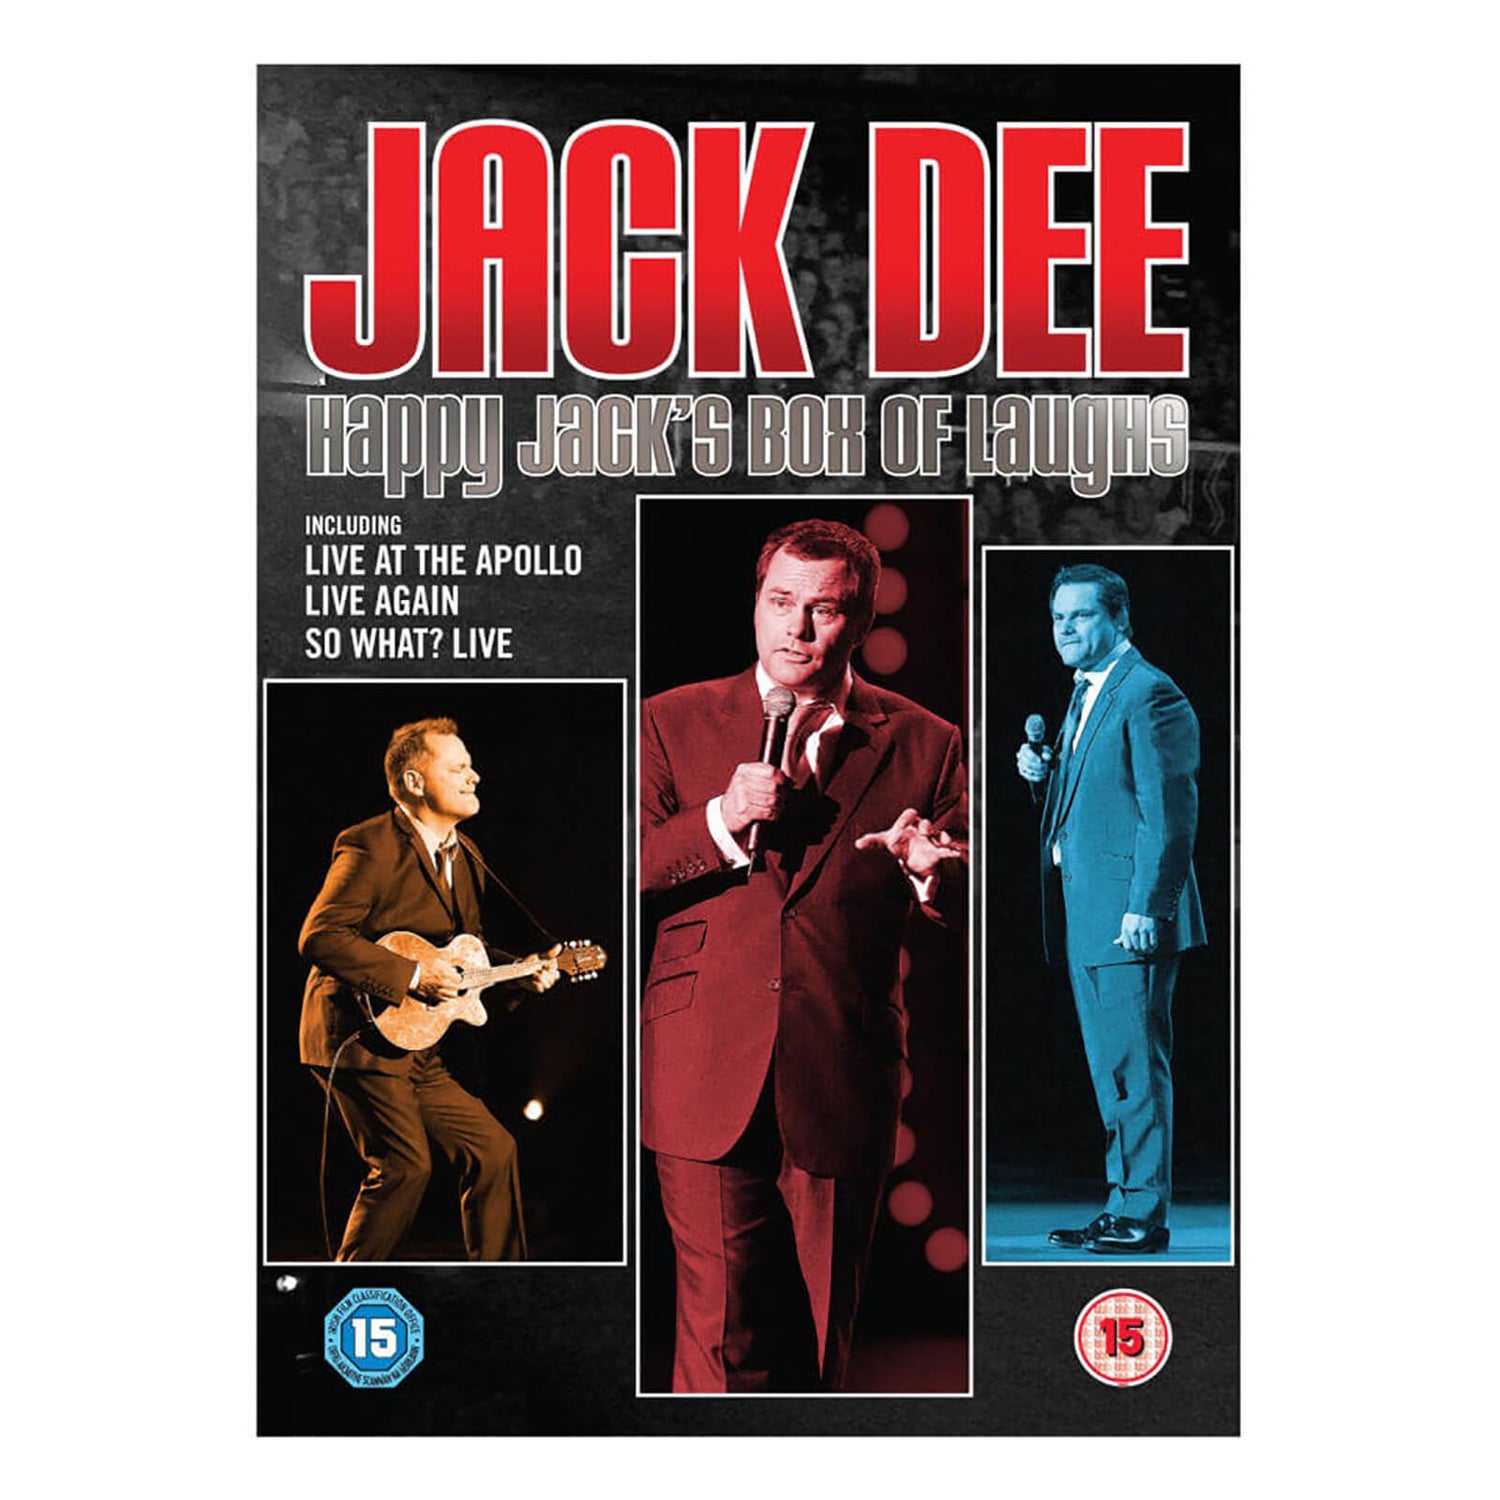 Jack Dee - Live Again / Live At The Hammersmith Apollo 2002 / Jack Dee Live (2013)